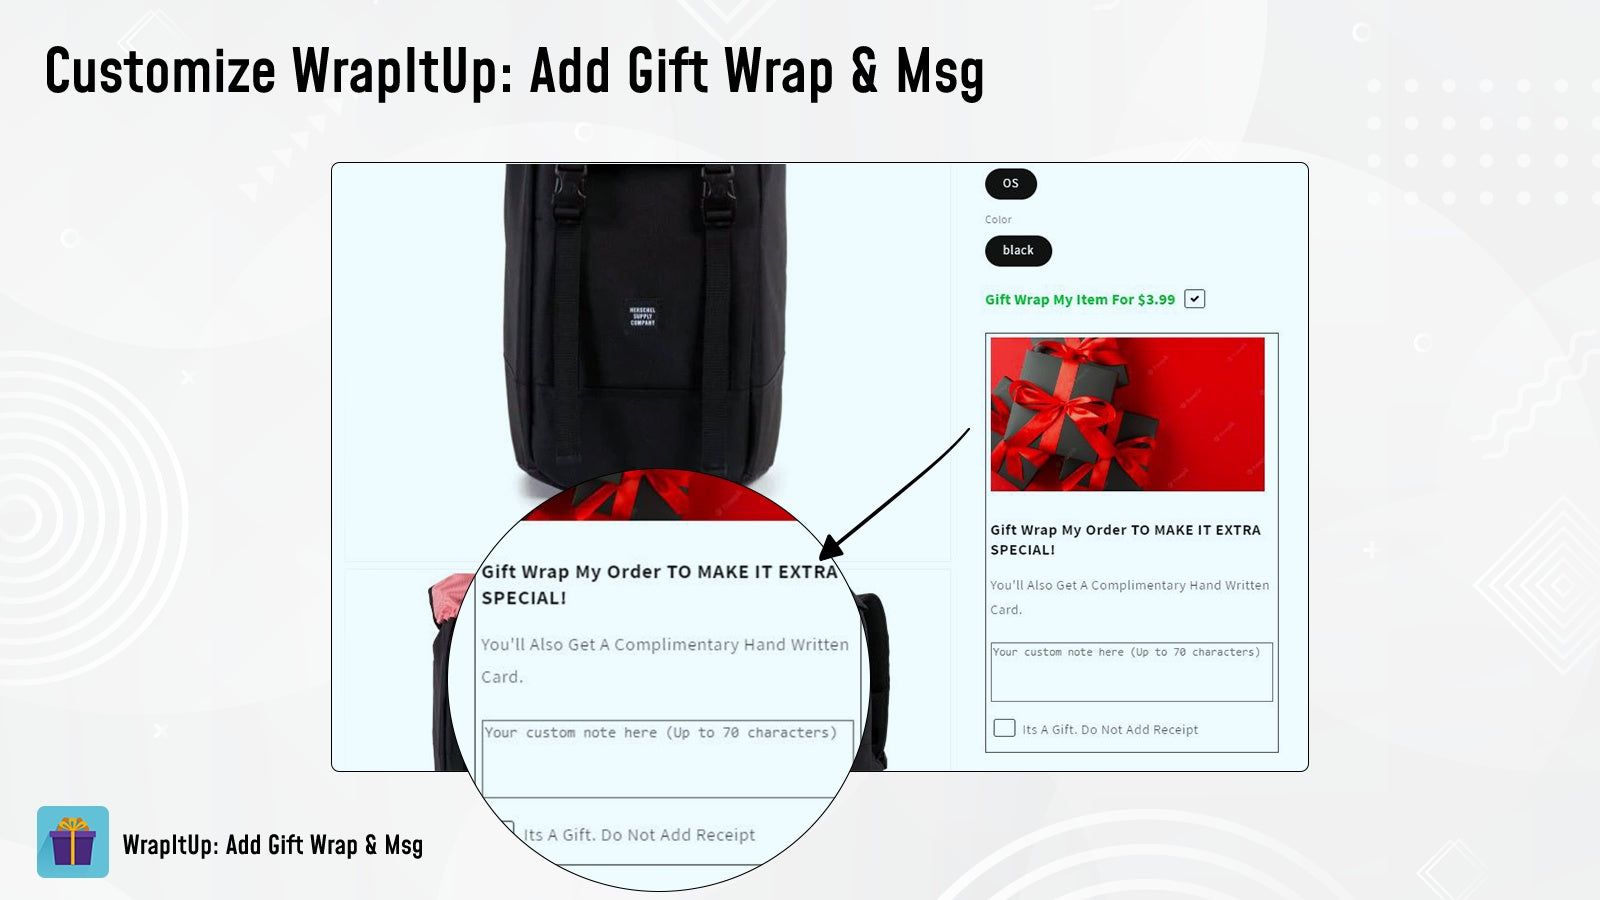 Customize Gift Pro: Add Gift Wrap & Msg